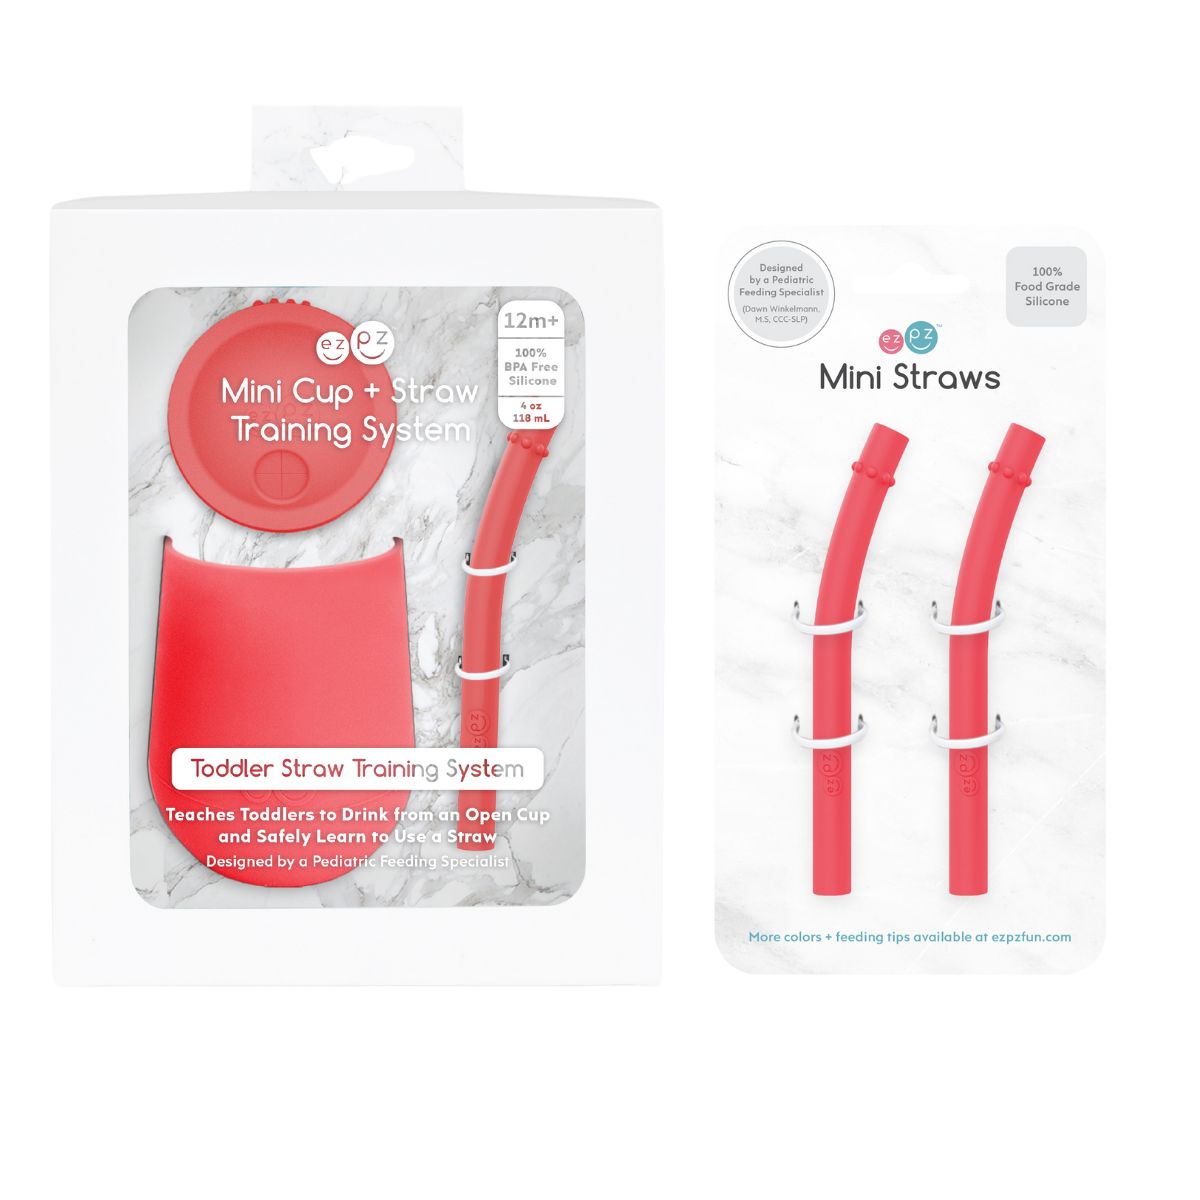 ezpz Mini Cup + Straw Training System with Extra 2-Pack of Straws in Coral